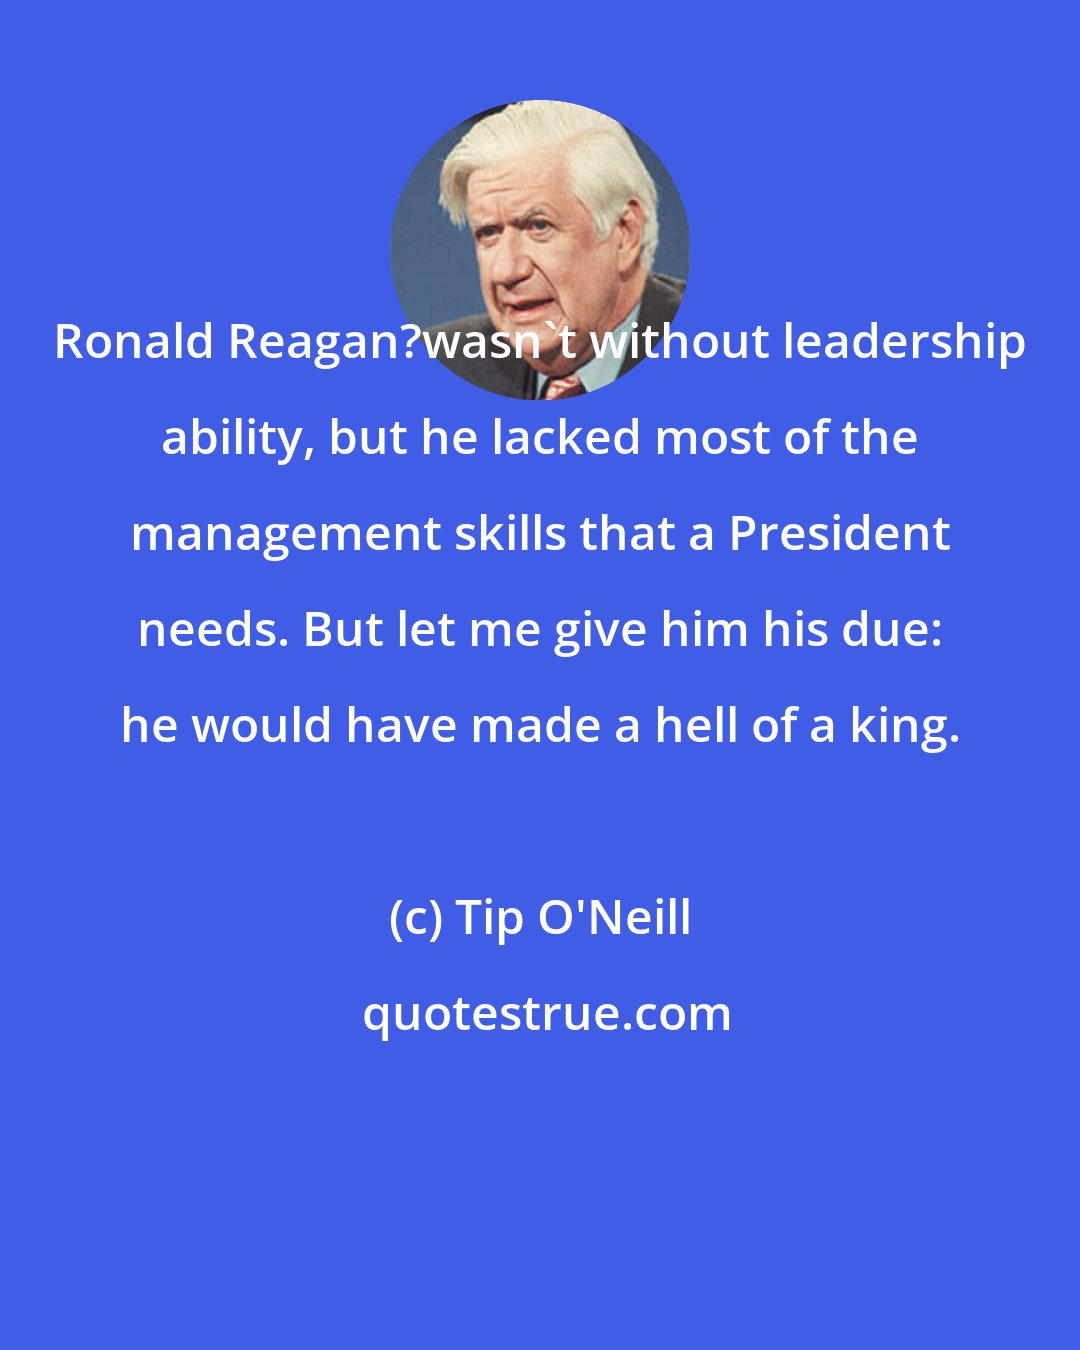 Tip O'Neill: Ronald Reagan?wasn't without leadership ability, but he lacked most of the management skills that a President needs. But let me give him his due: he would have made a hell of a king.